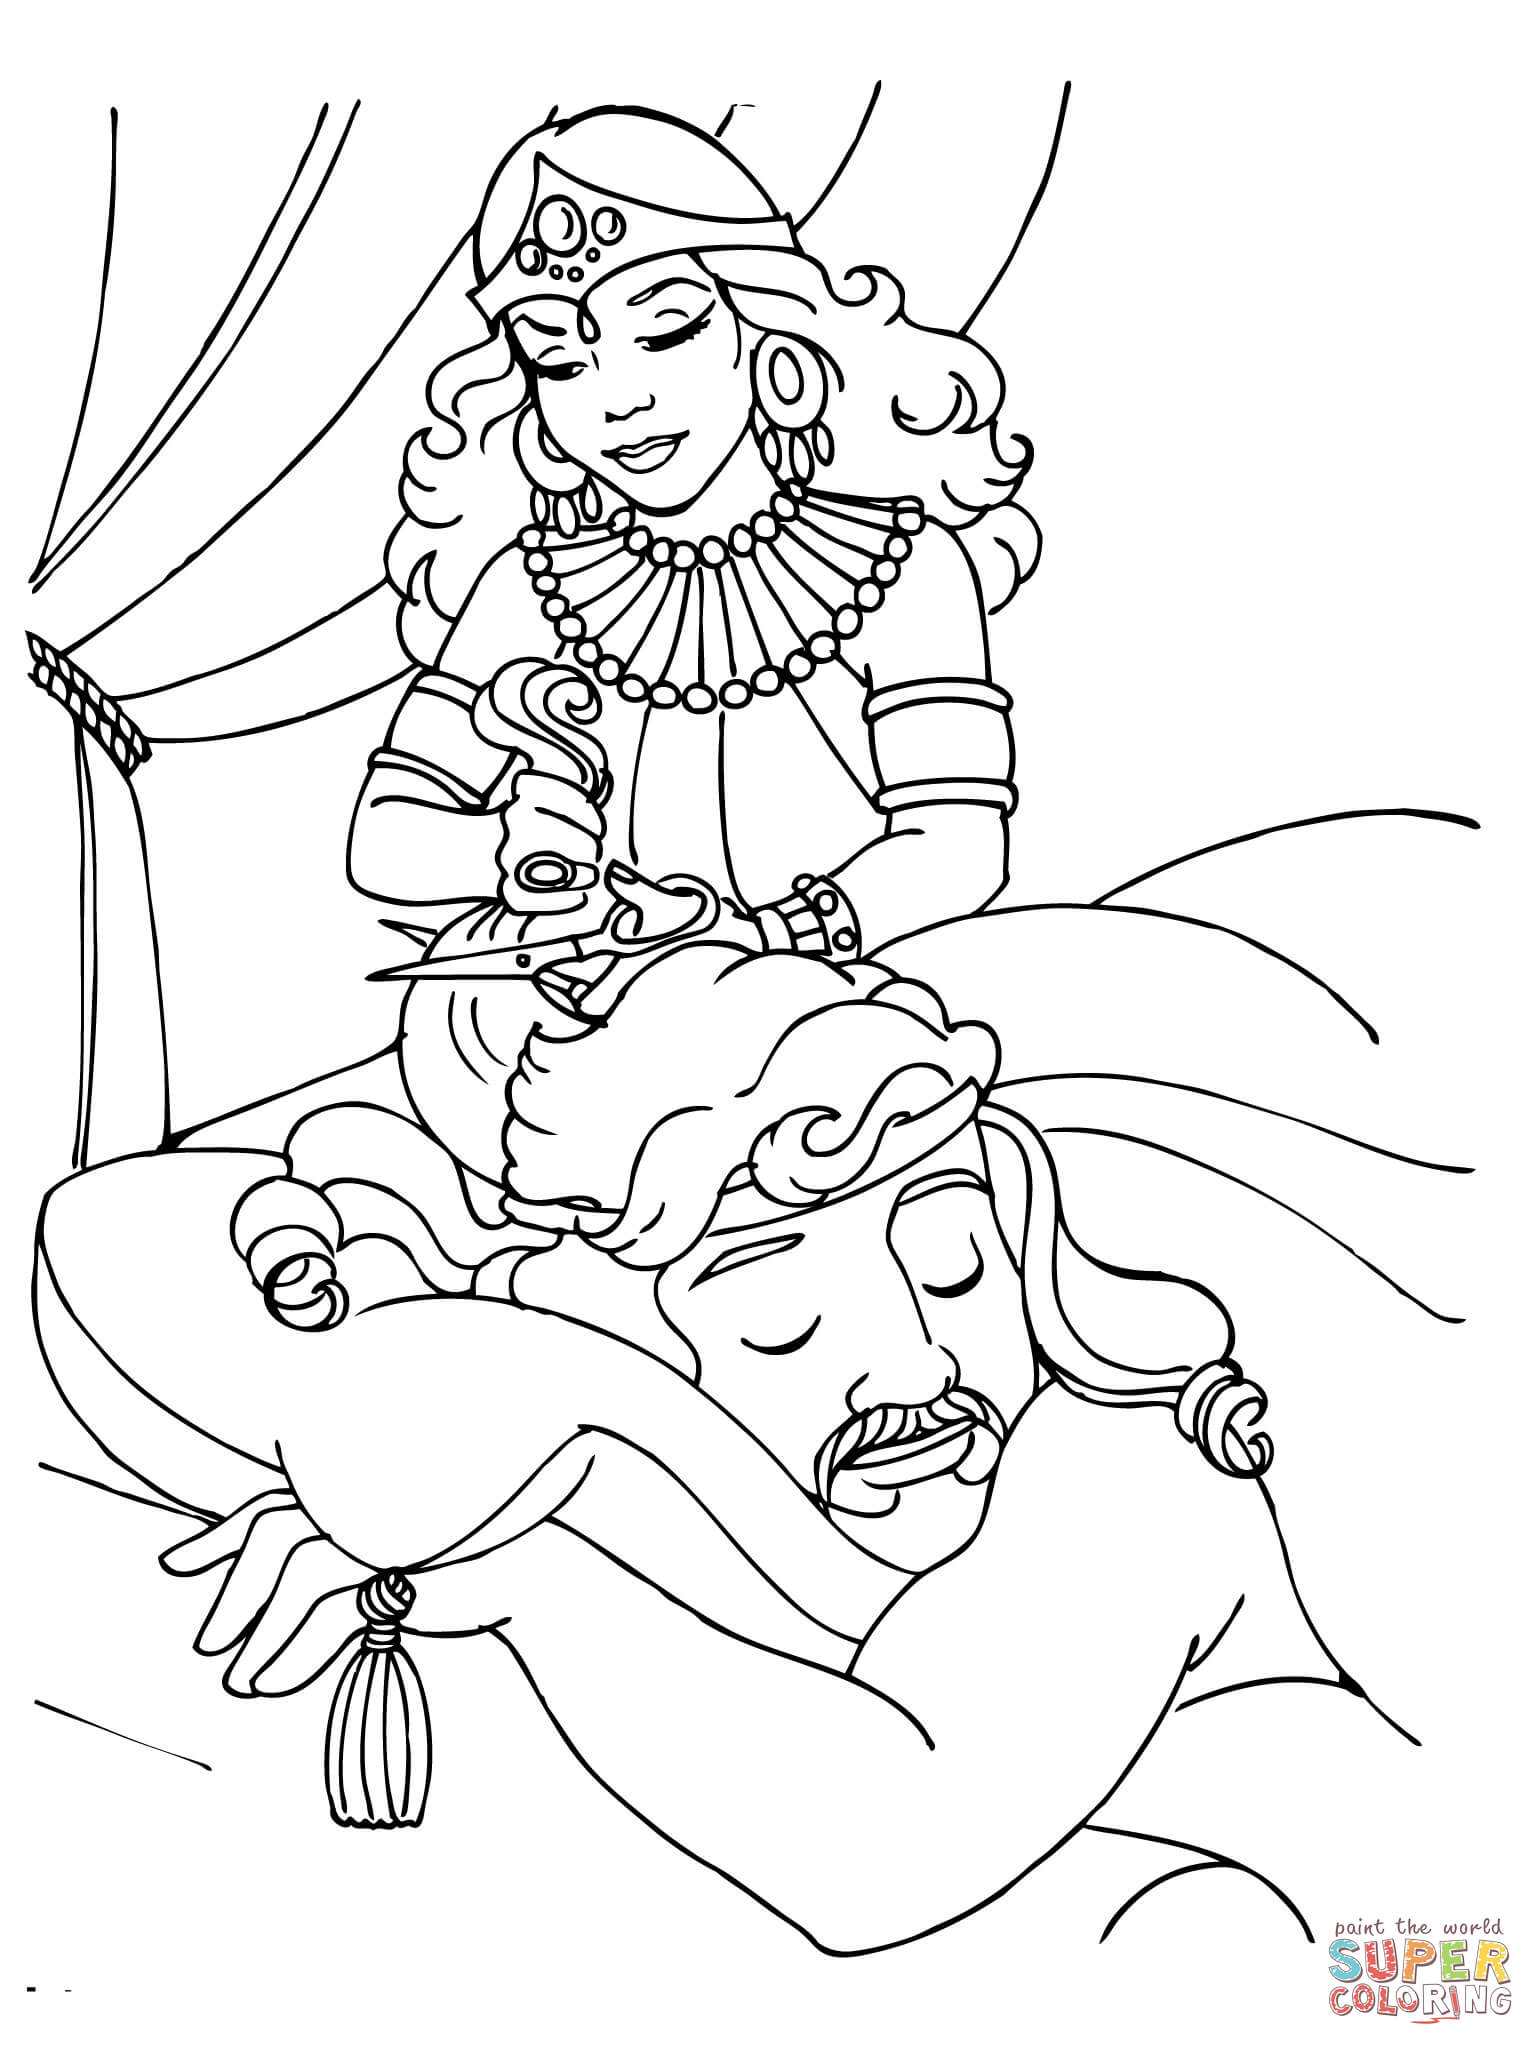 Coloring Pages Of Samson - Coloring Home